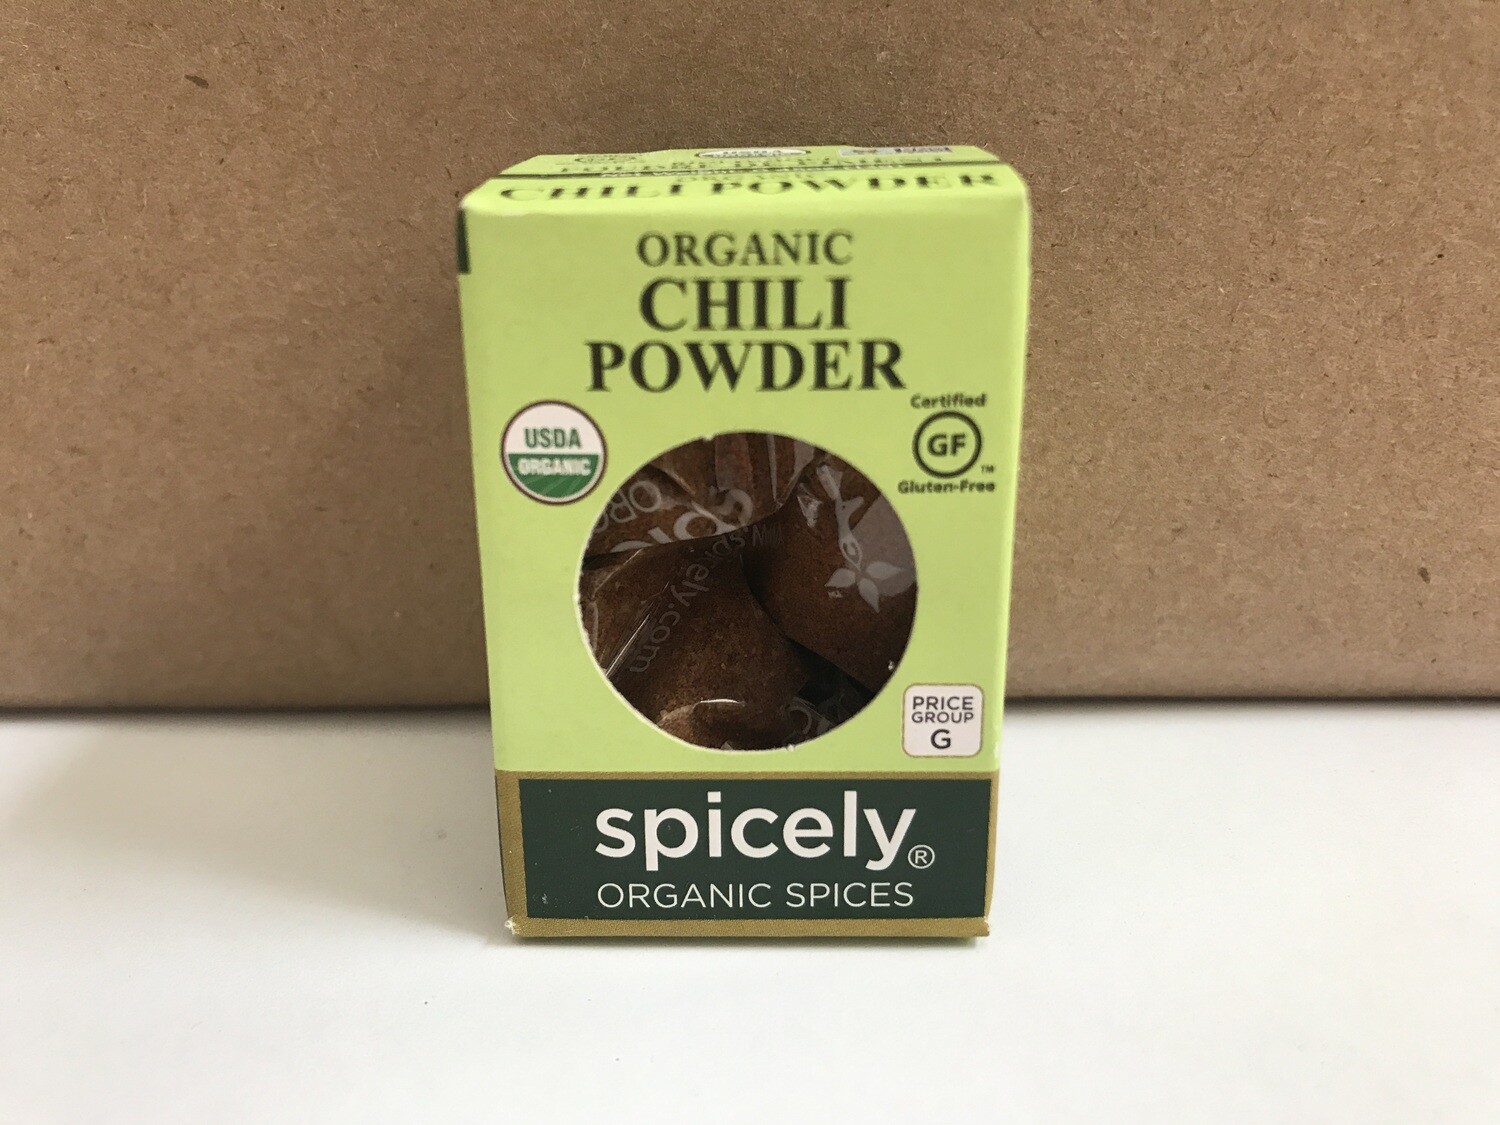 Grocery / Spice / Spicely Chili Powder